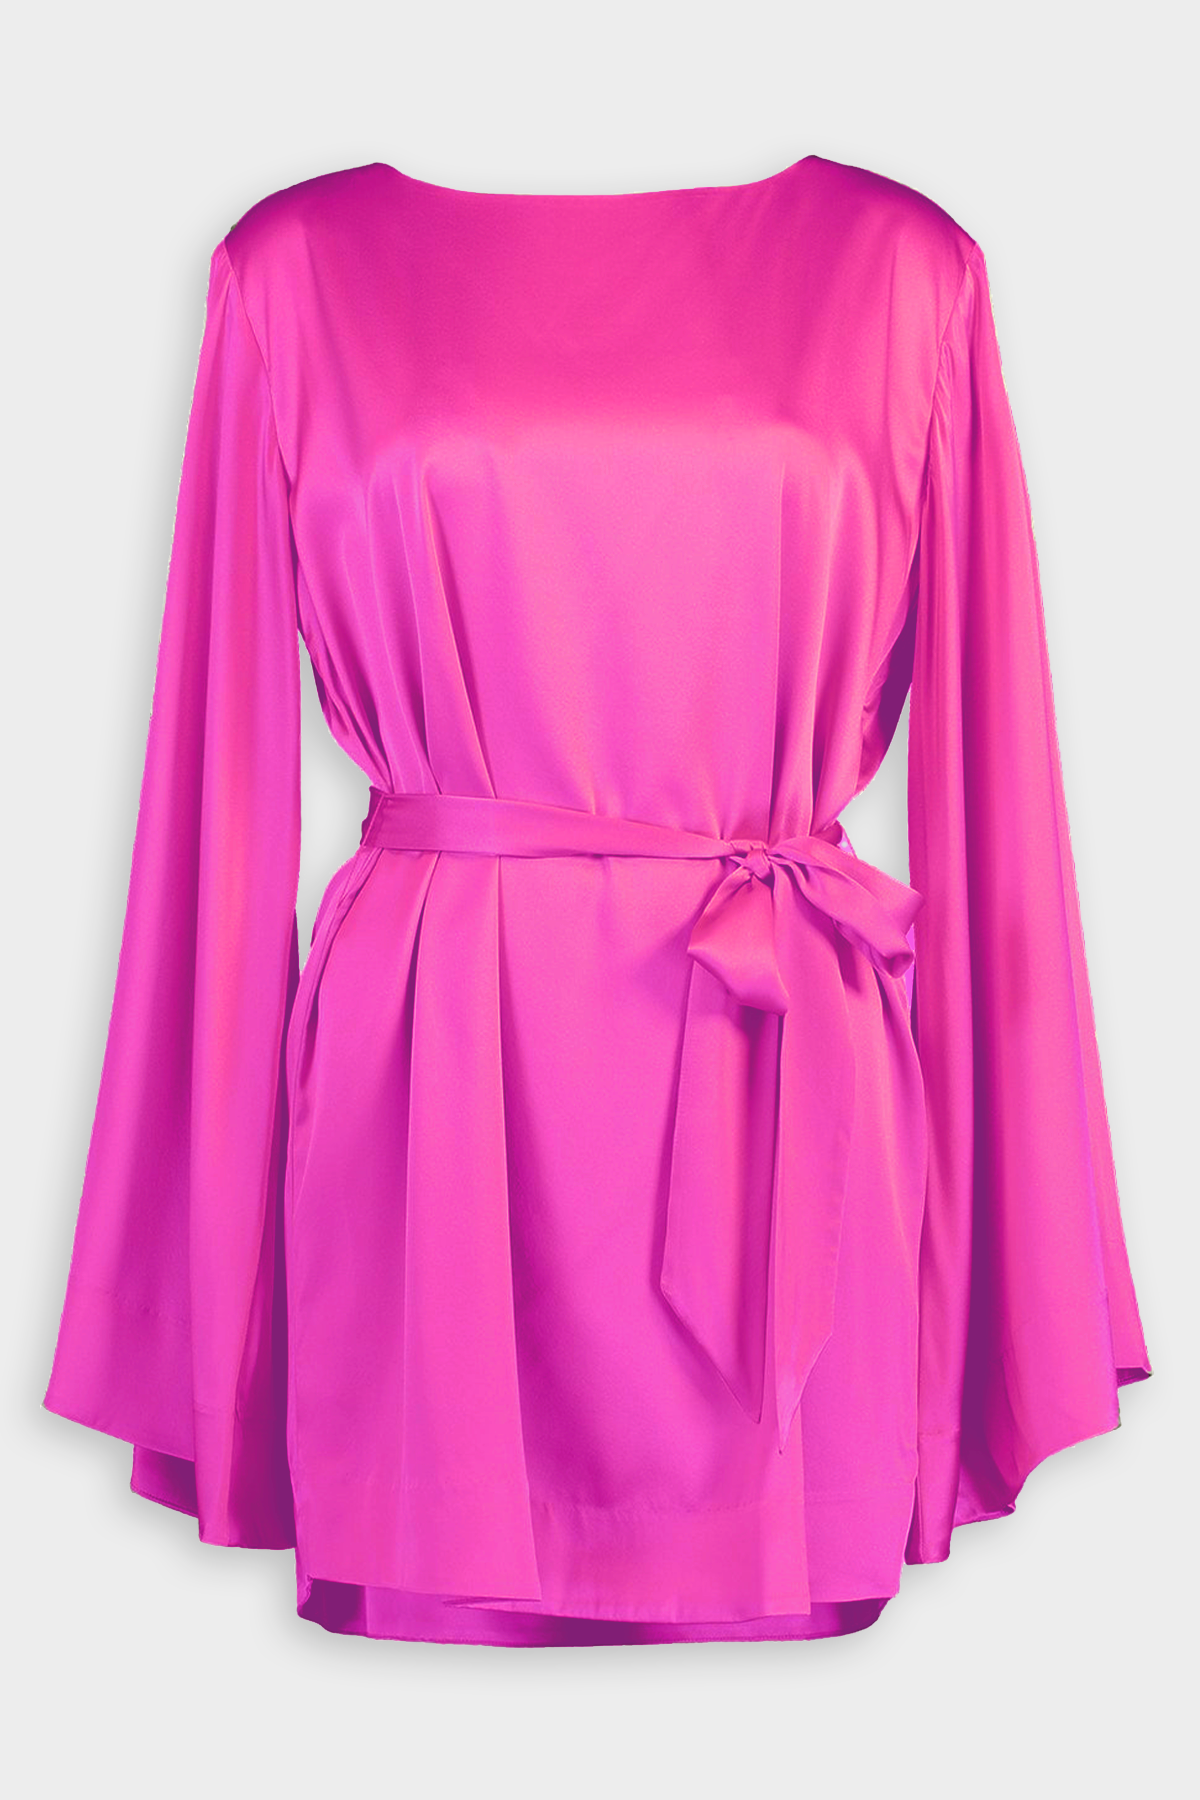 Ophelia Dress in Neon Pink